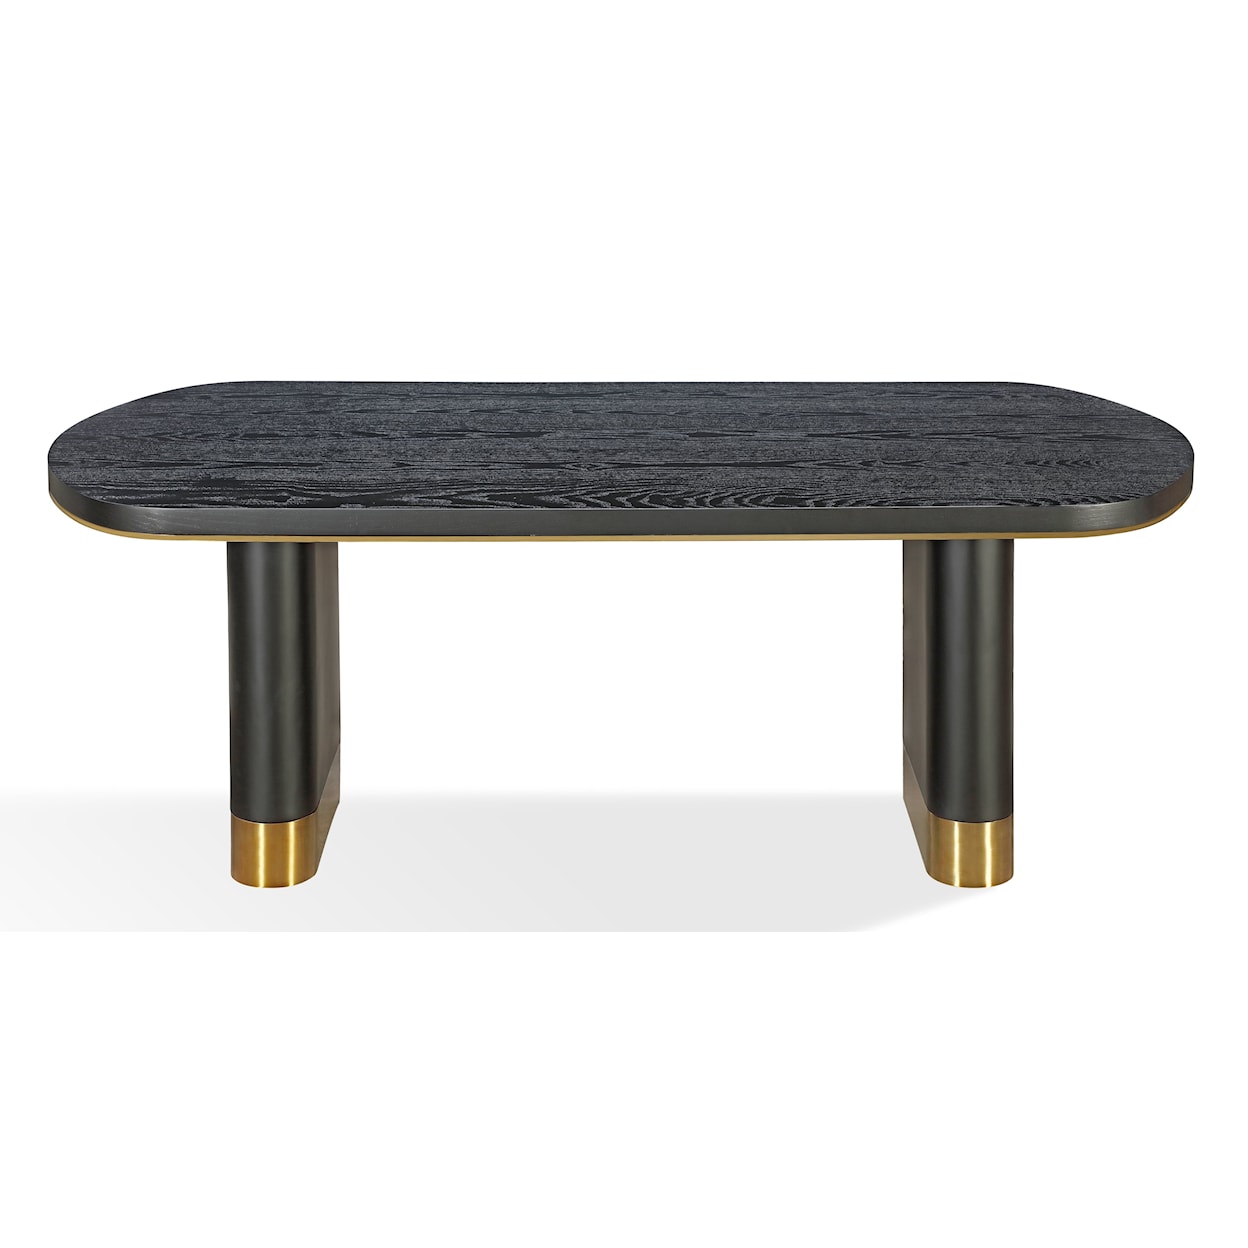 Modus International Doheny Wood and Metal Oval Dining Table